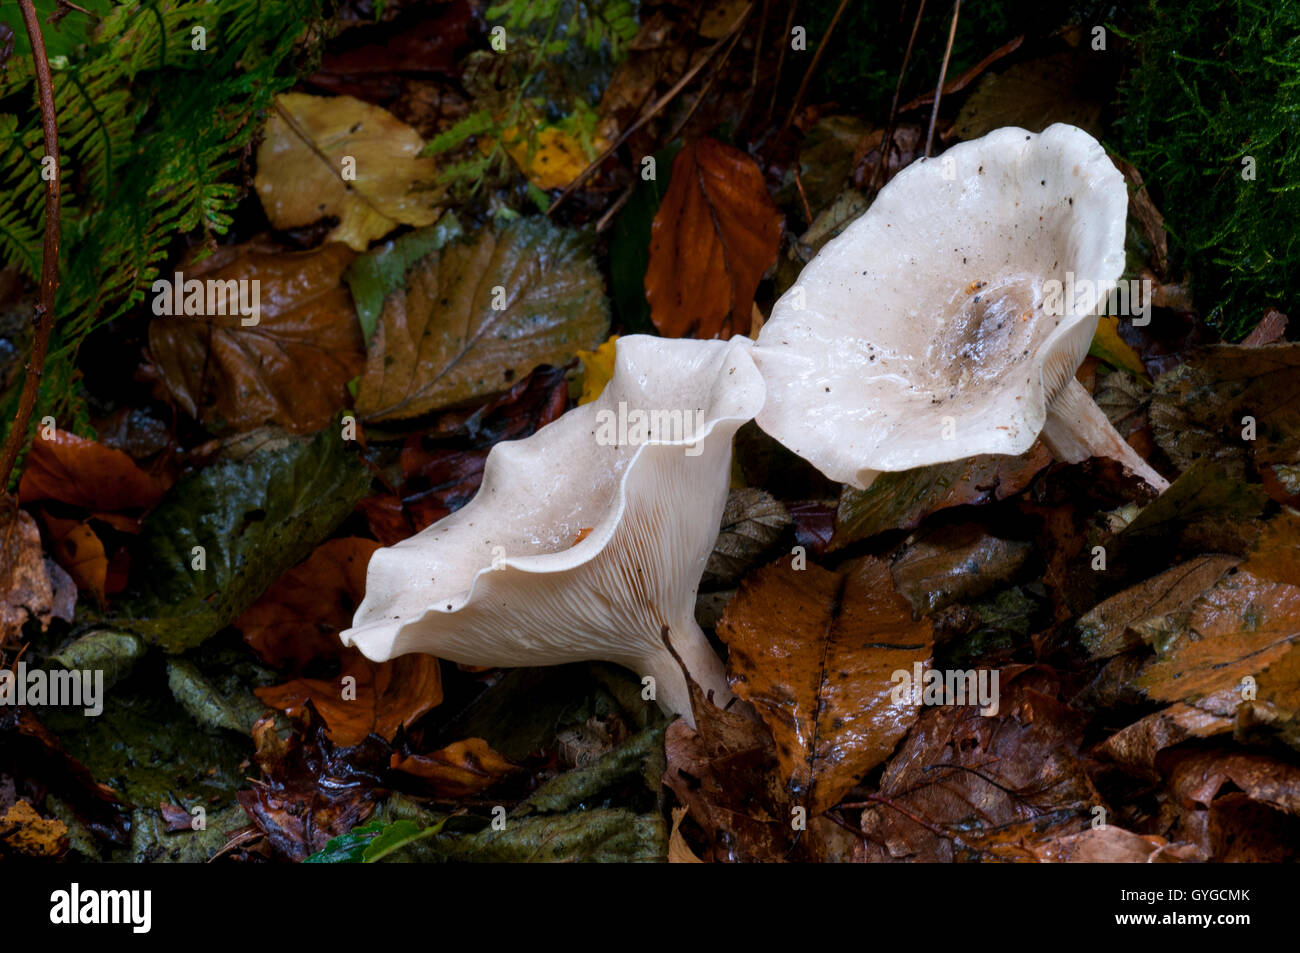 Clouded funnel fungus (Clytocybe nebularis) growing in Clumber Park, Nottinghamshire. October. Stock Photo